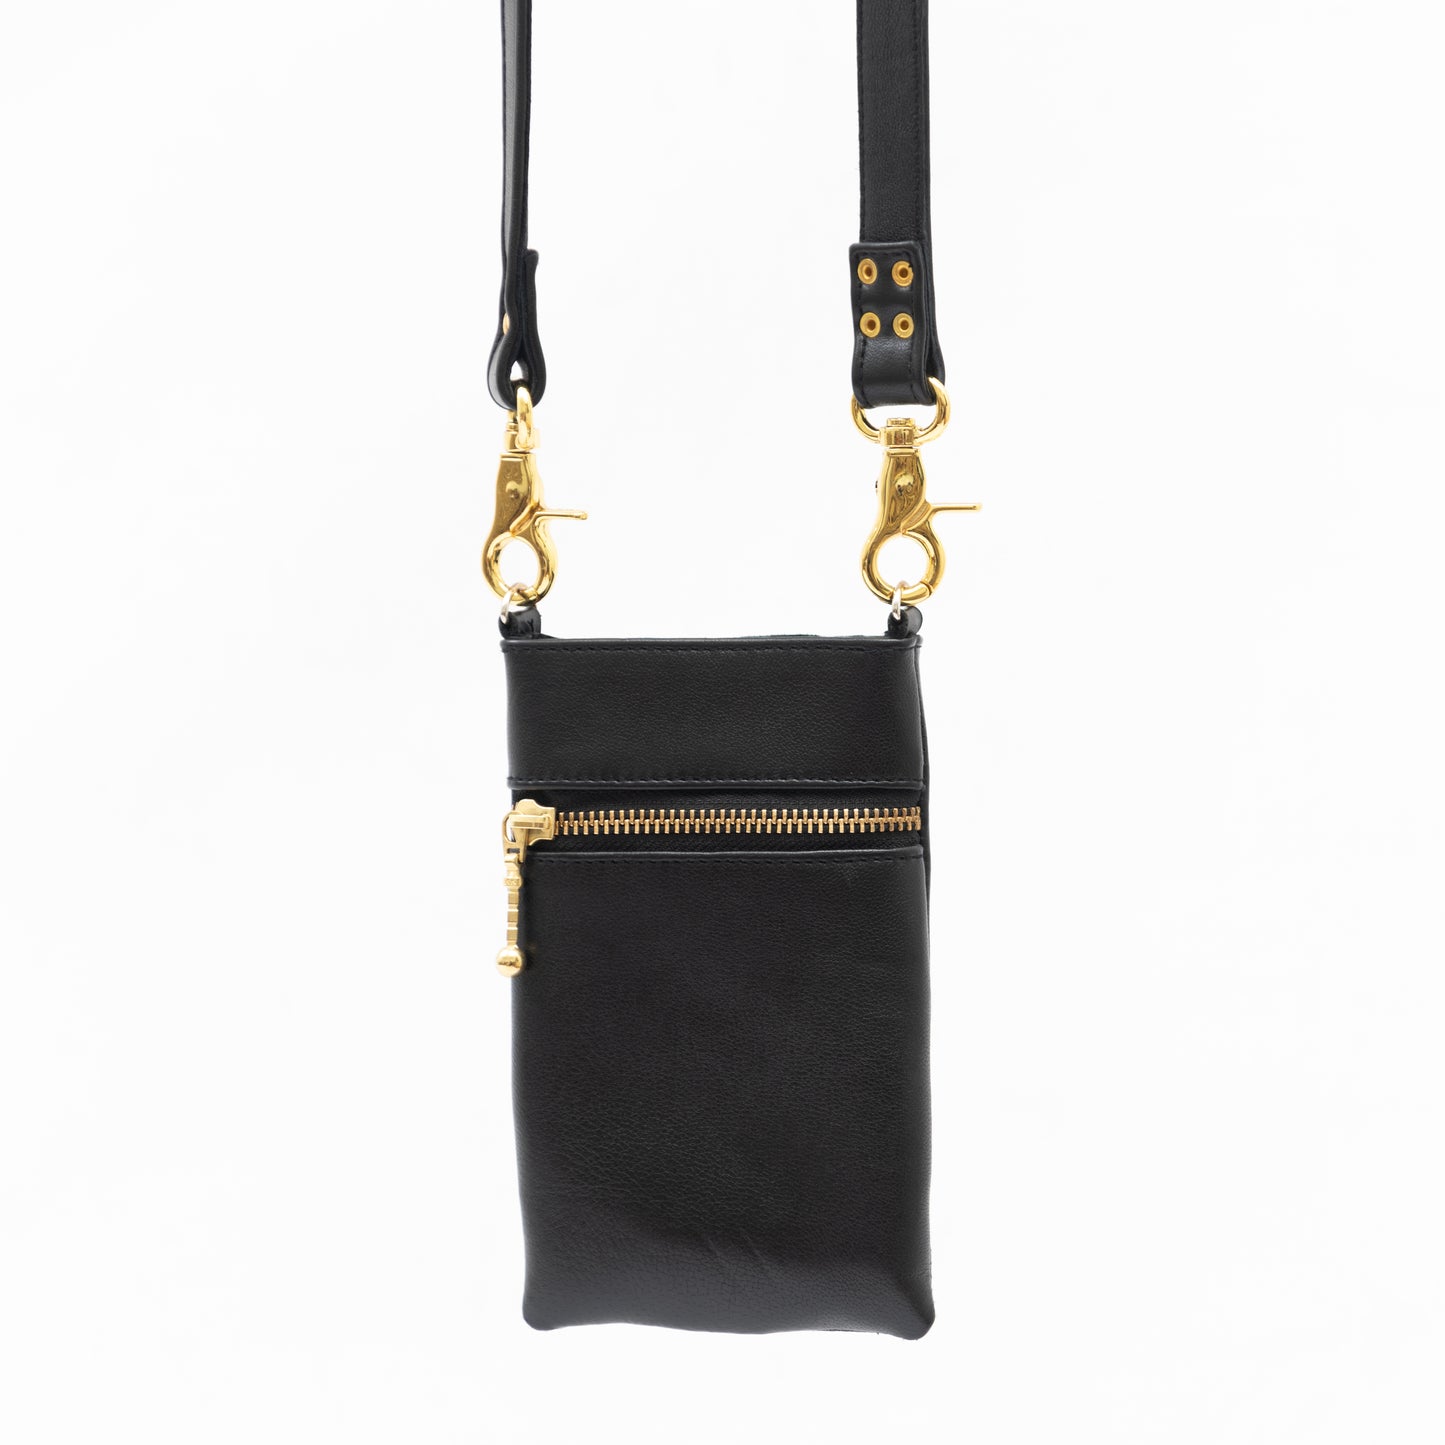 back view of black leather crossbody phone bag with hidden gold zip pocket. 